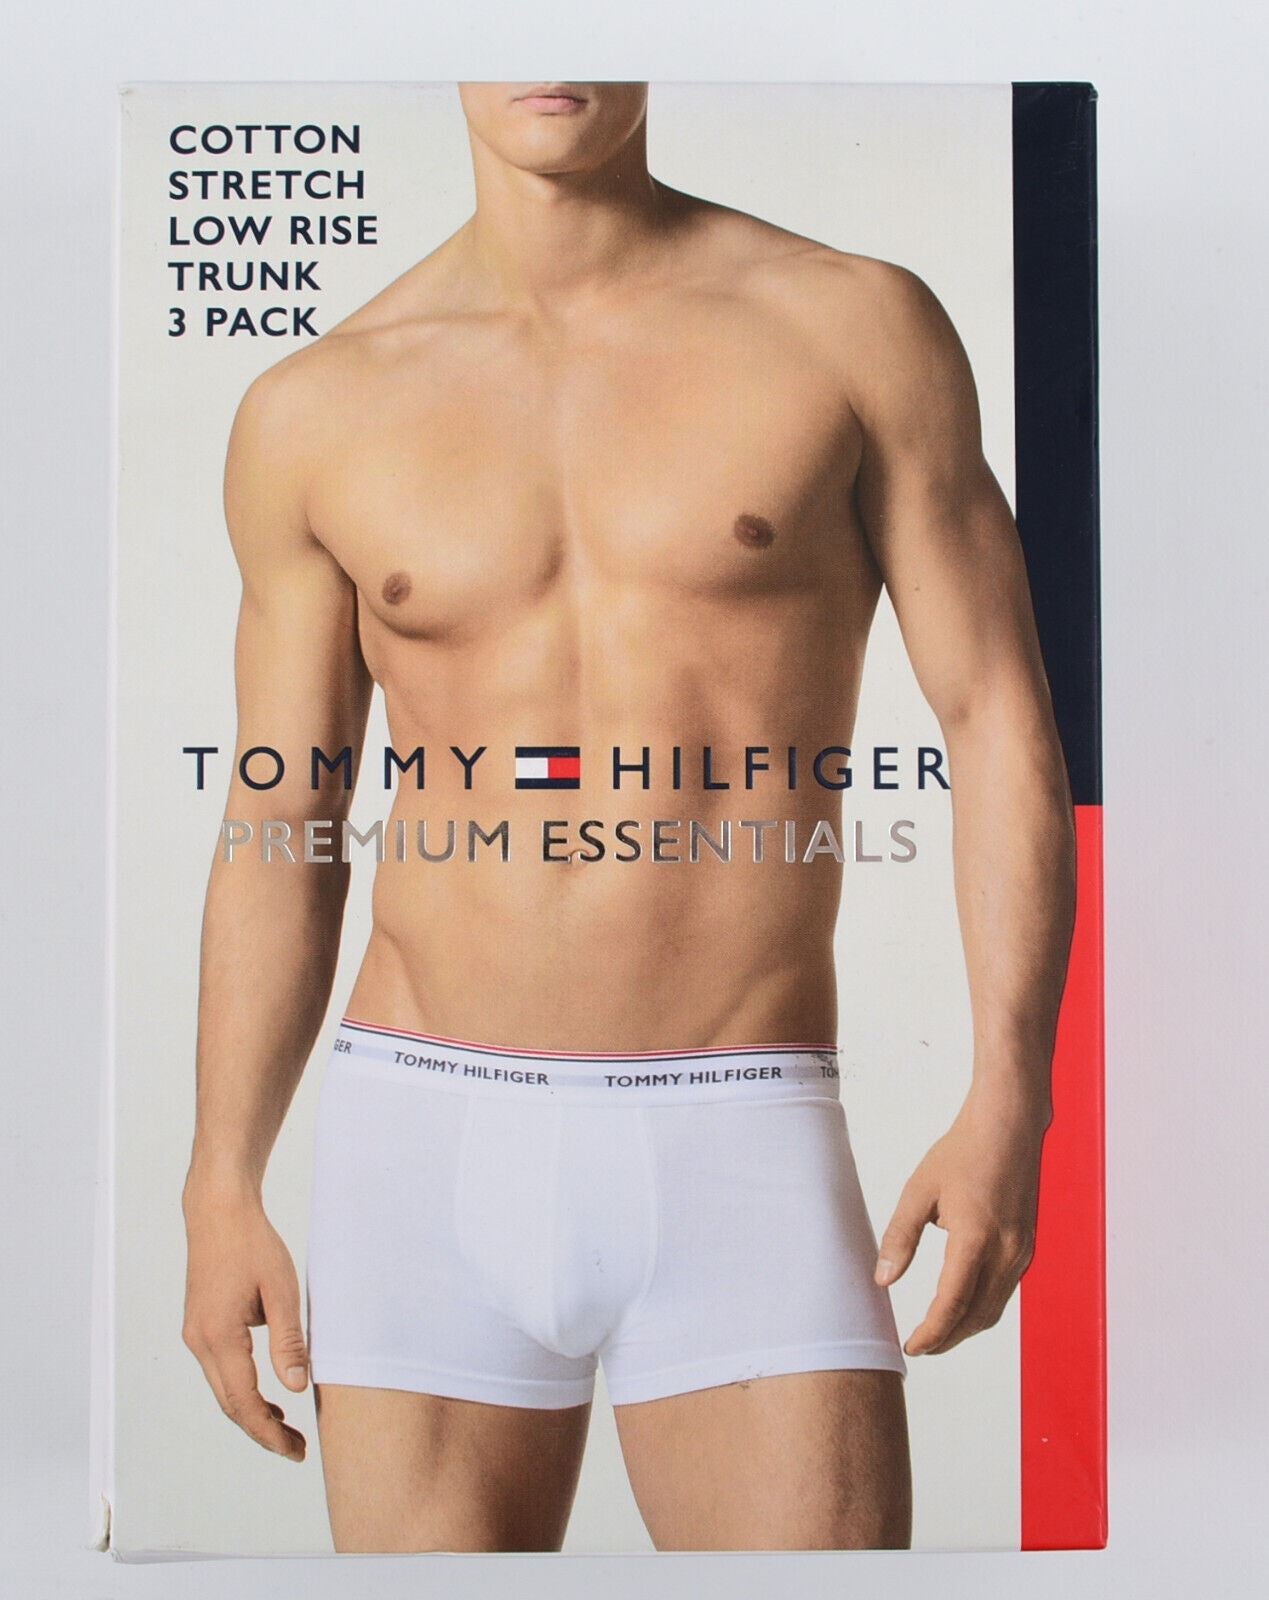 TOMMY HILFIGER Underwear: Men's 3-Pack Low Rise Boxer Trunks, Black, size SMALL